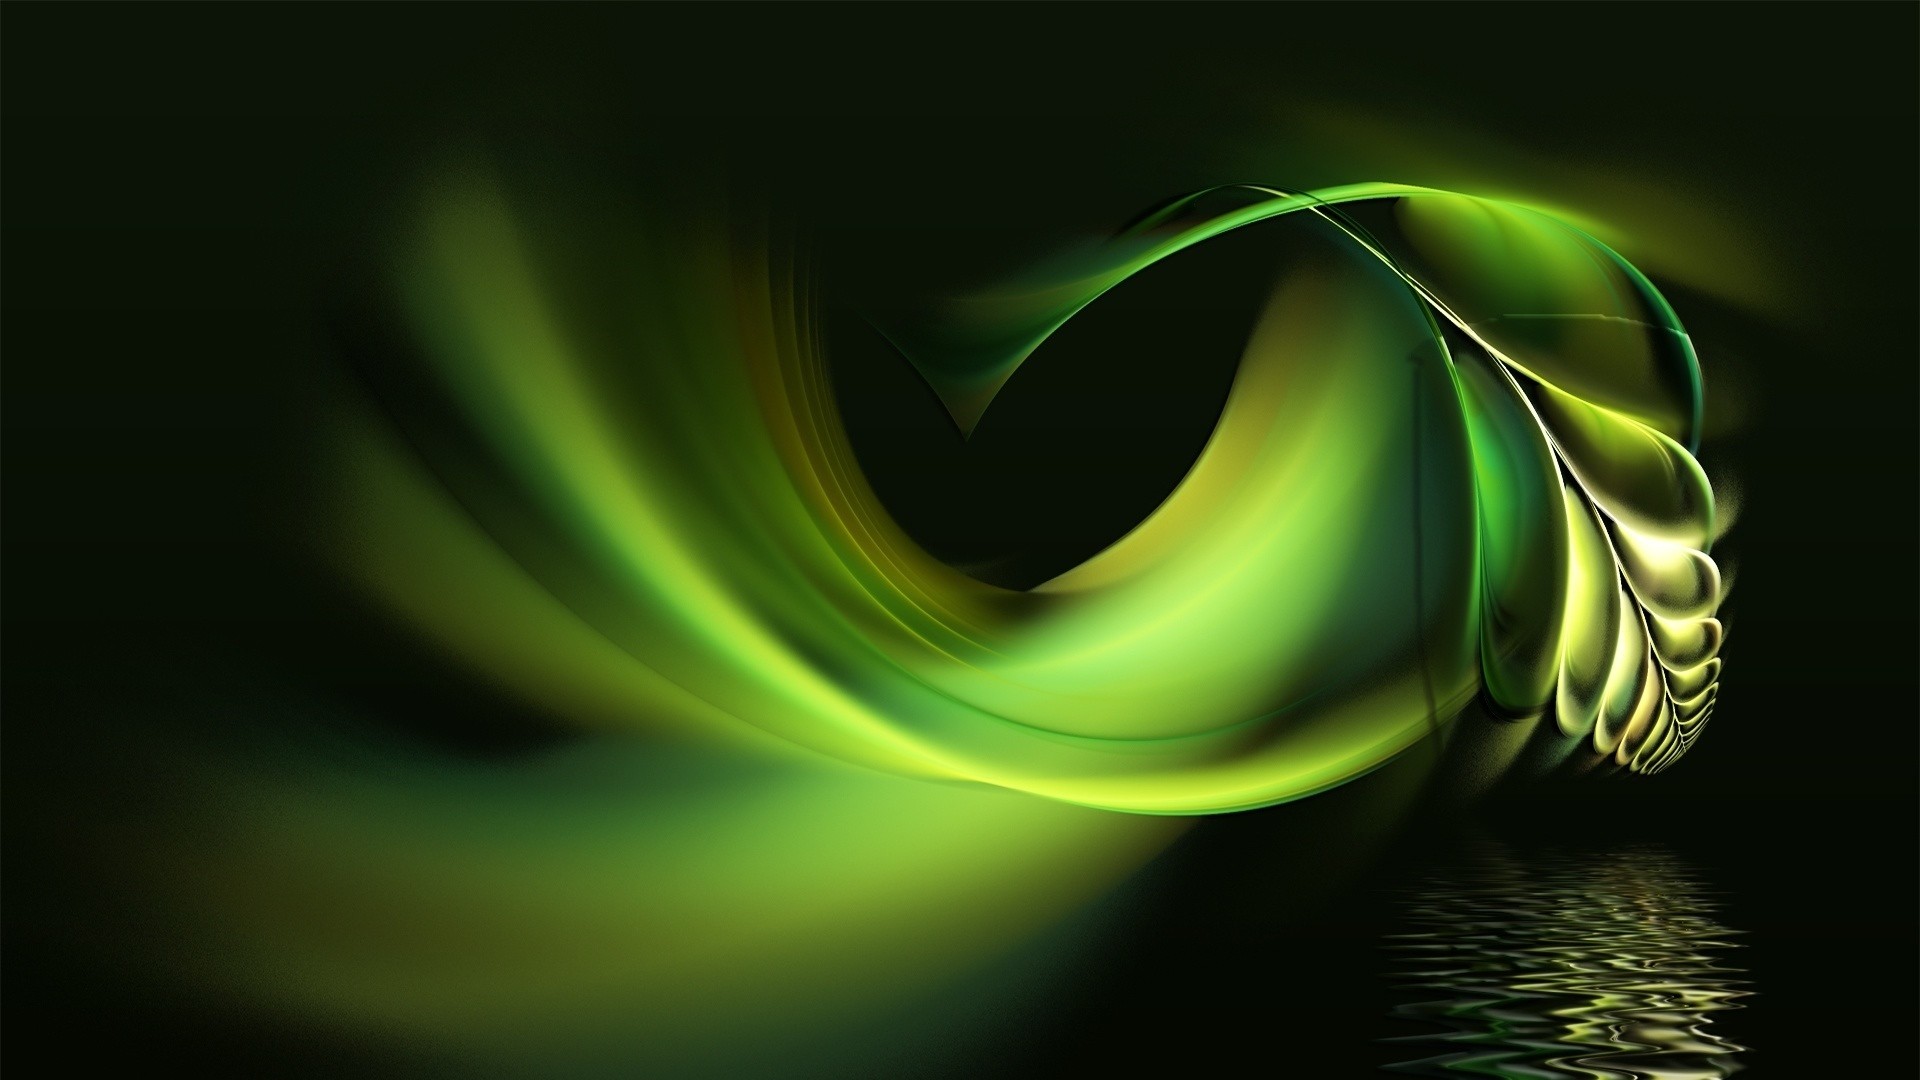 1920x1080  Wallpaper black, white, abstract, pen, water, green